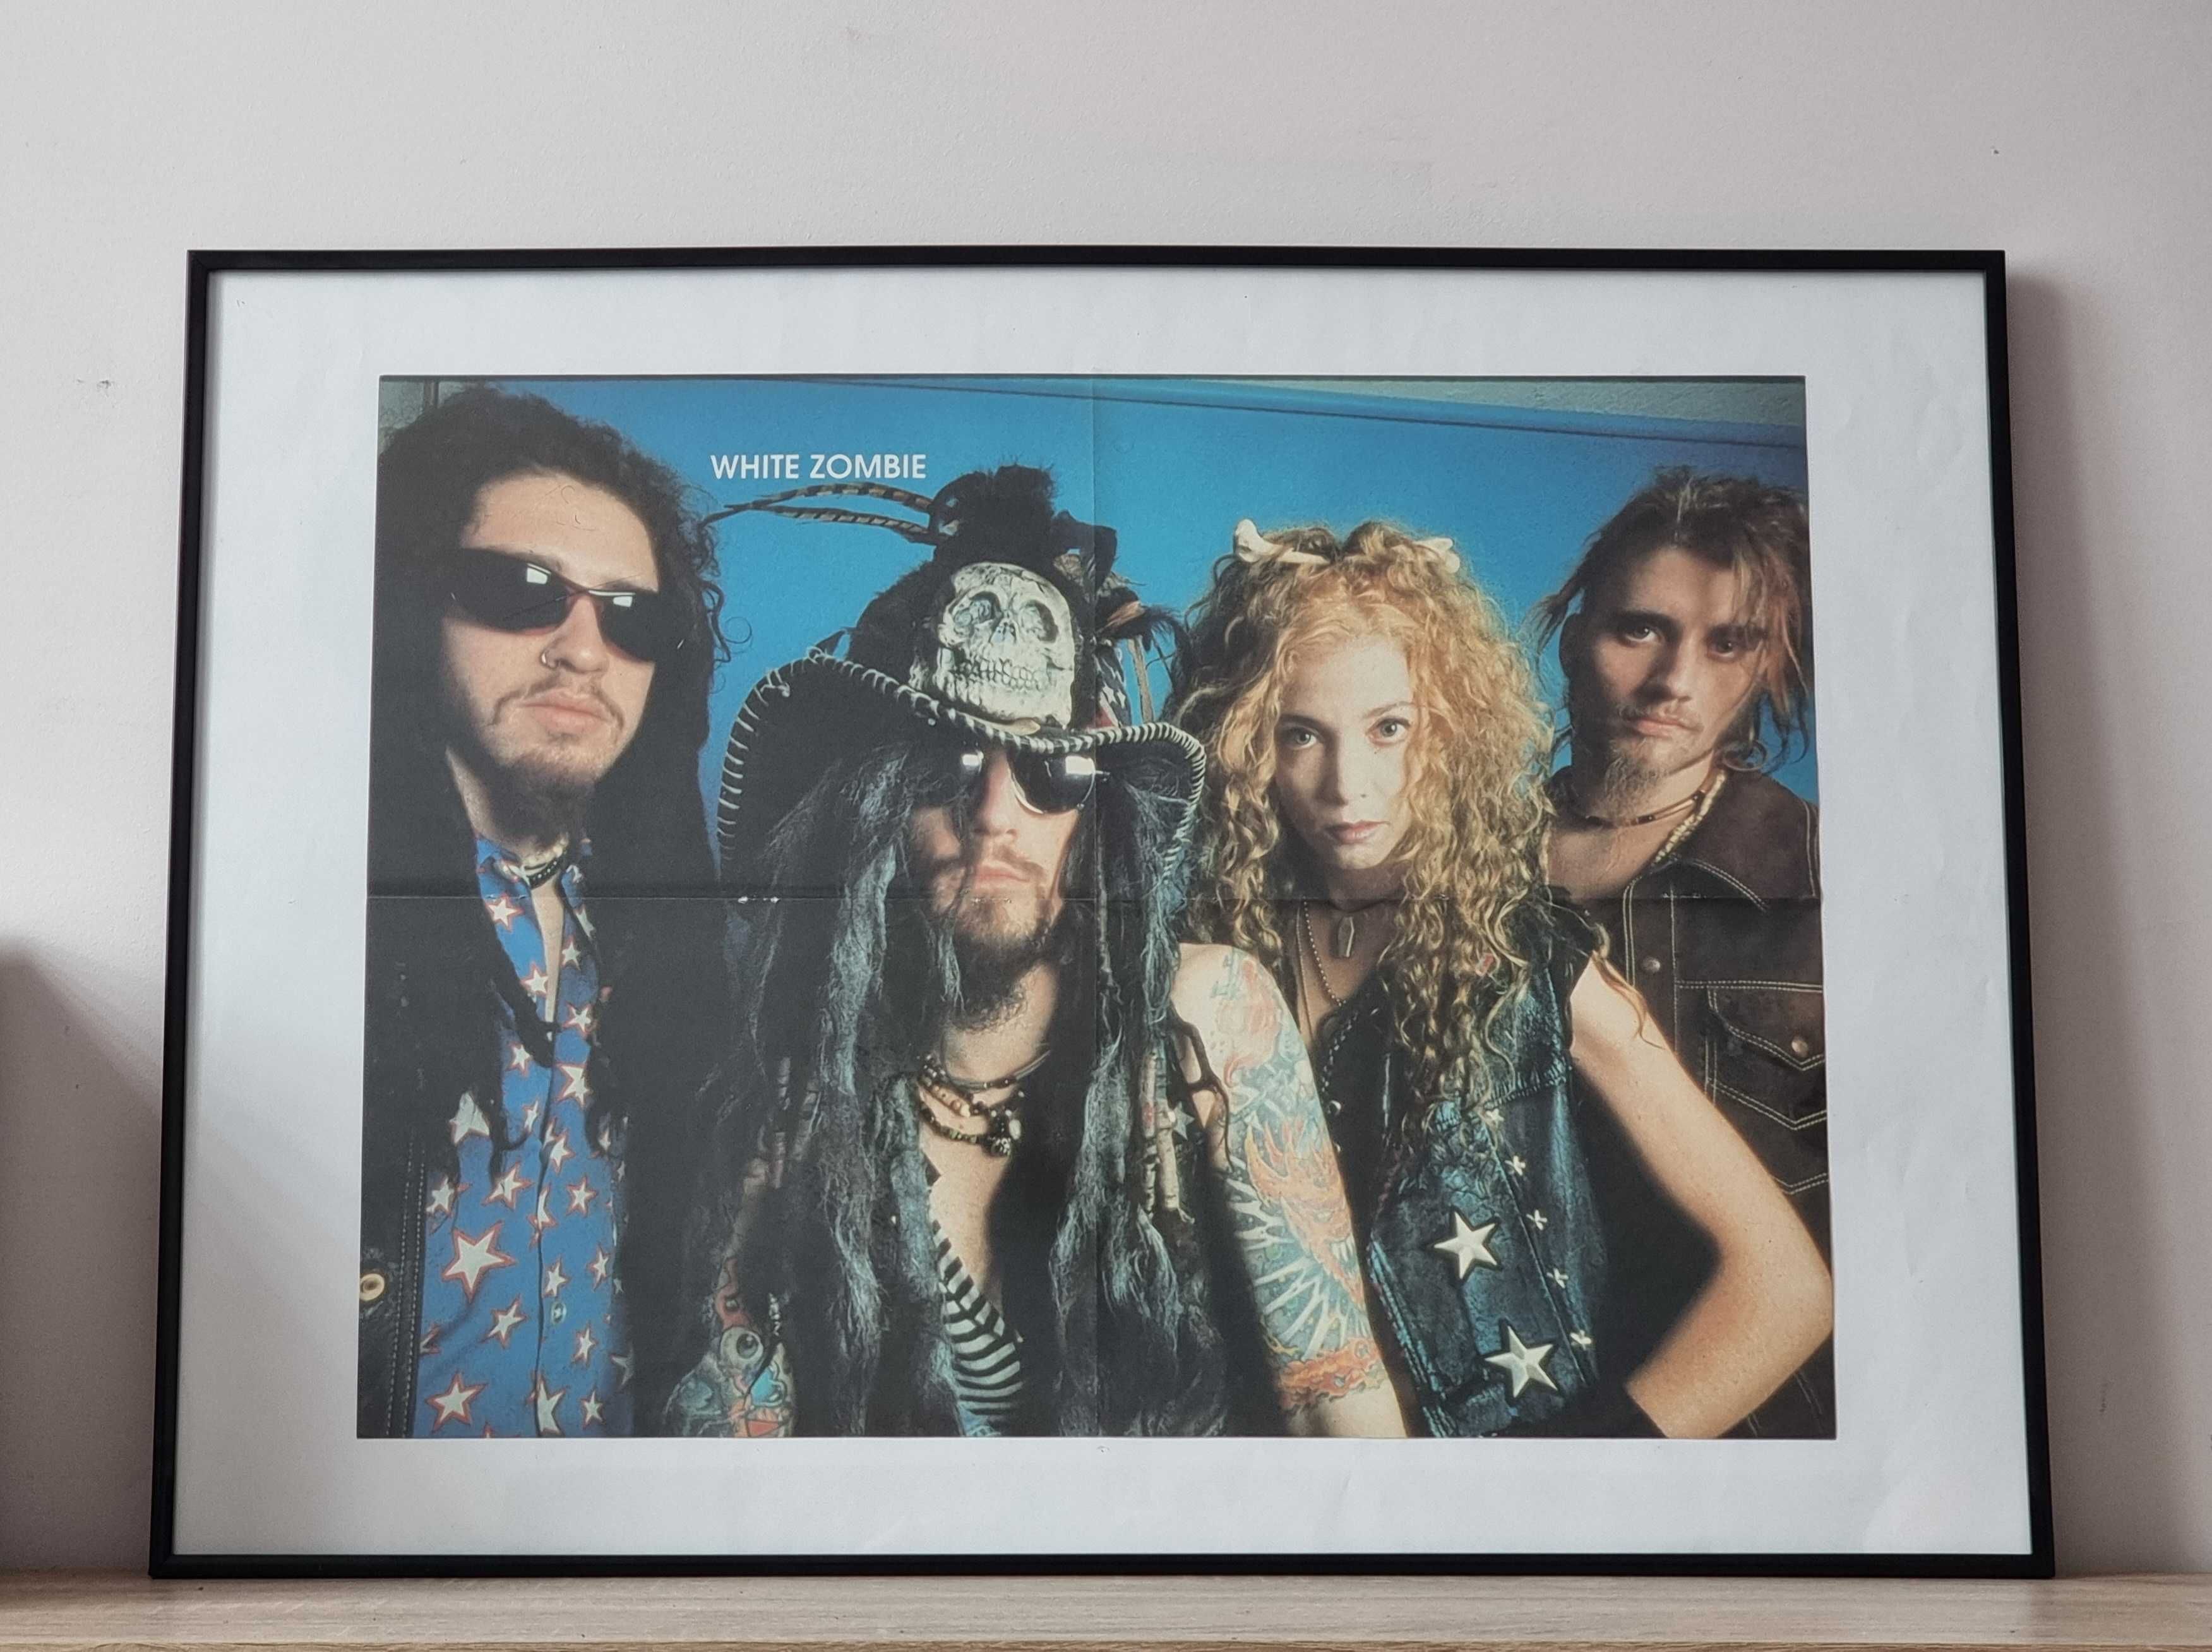 PLAKAT/POSTER - WHITE ZOMBIE - Format A2 (60 x 40 cm) - NOWY!